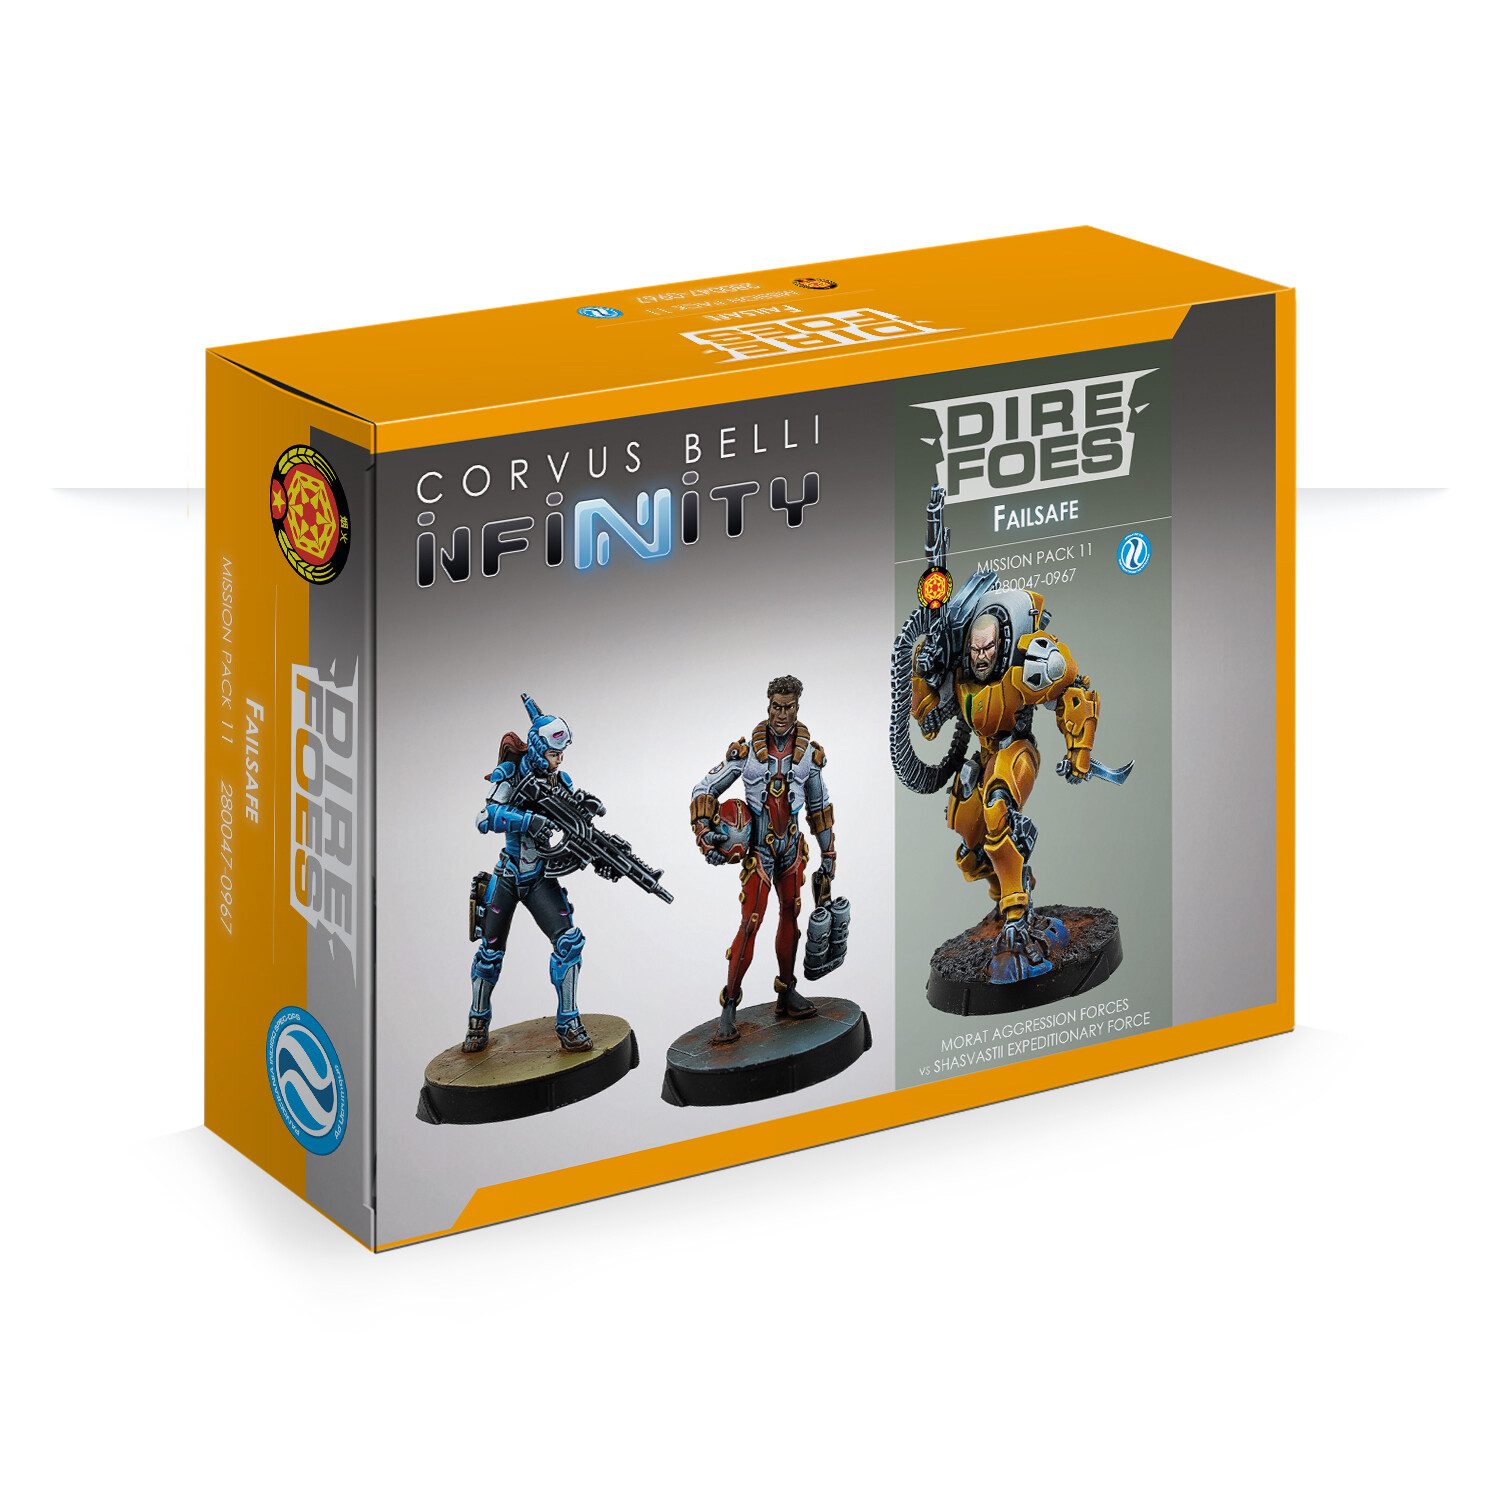 (Preorder 11/30) Dire Foes Mission Pack 11: Failsafe